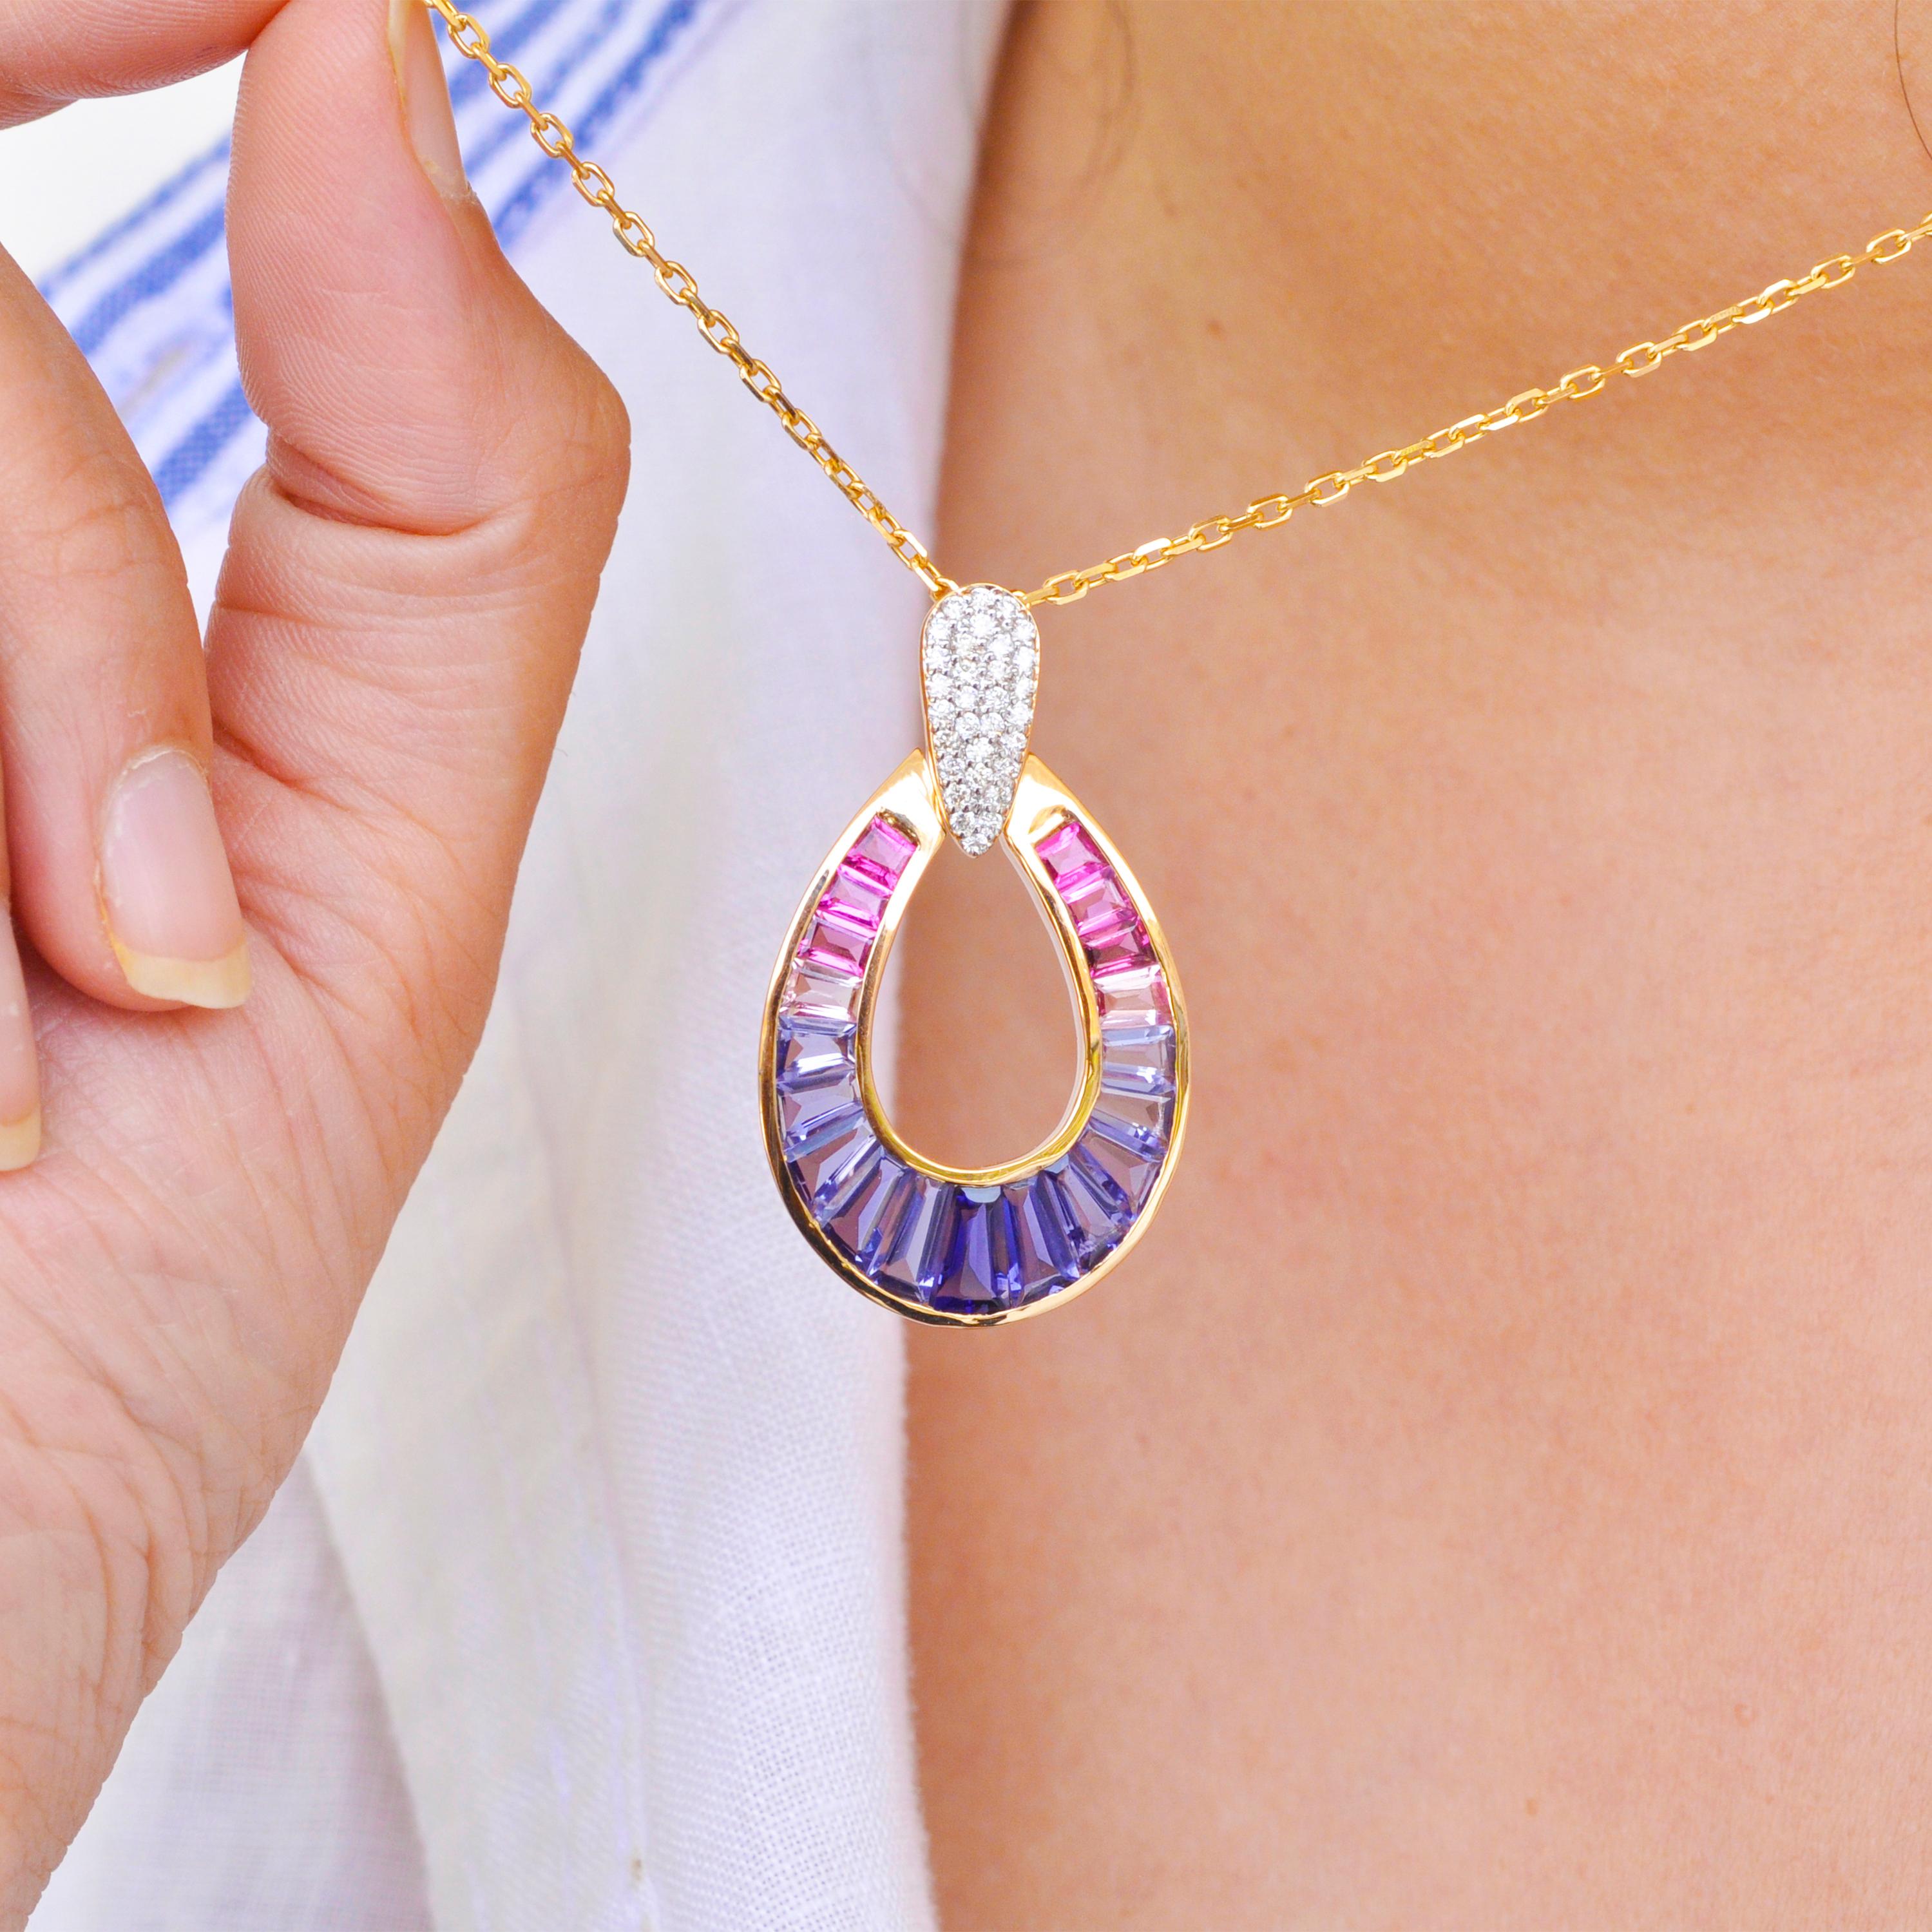 18 karat gold taper baguette Iolite pink tourmaline raindrop diamond pendant necklace

Art, color and culture all come together to inspire this 18 karat gold taper baguette Iolite Pink Tourmaline raindrop diamond pendant necklace, which showcases